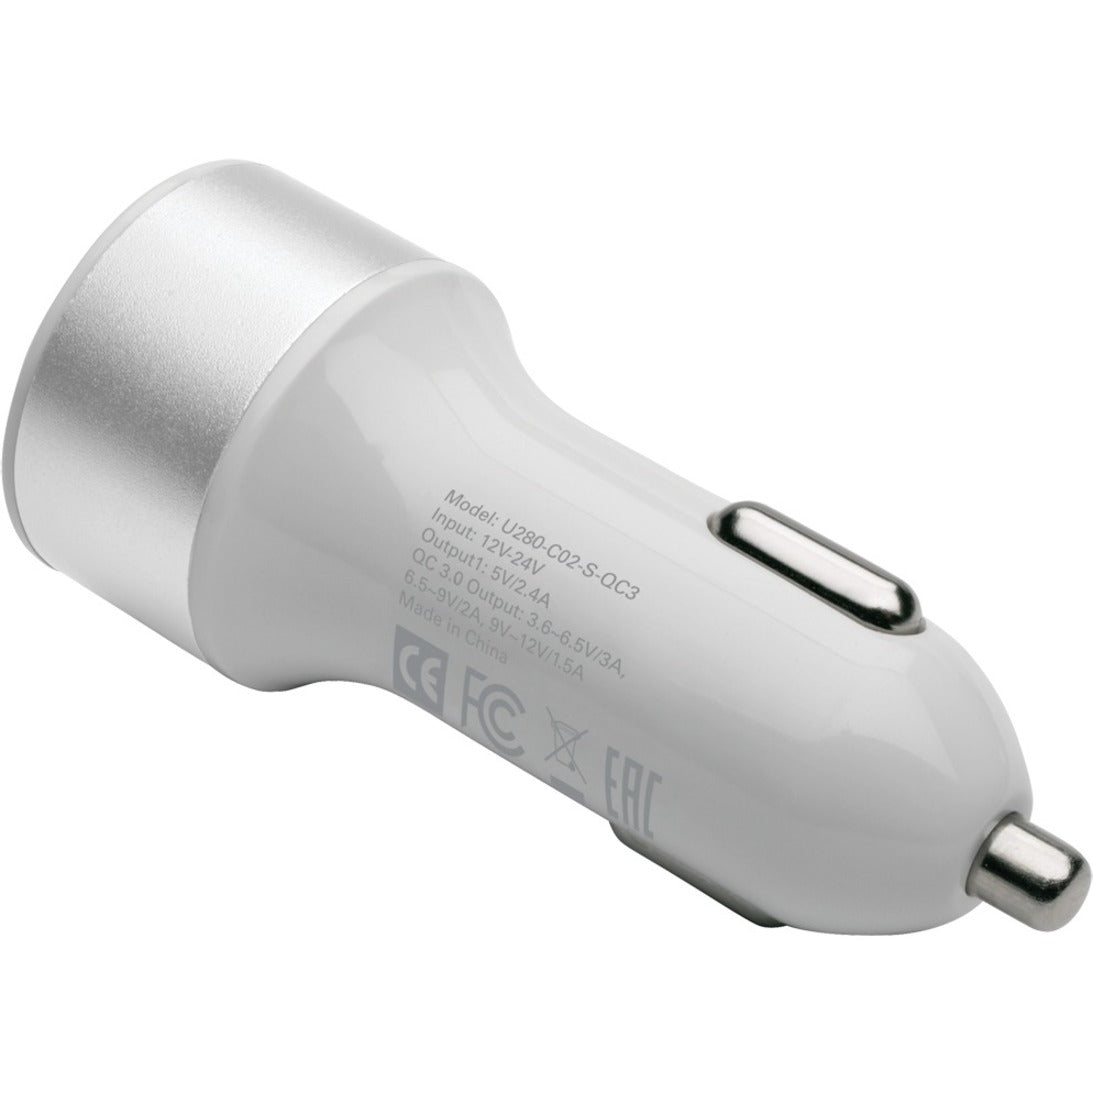 Tripp Lite Dual-Port USB Car Charger for Tablets and Cell Phones with Qualcomm Quick Charge 3.0 Technology